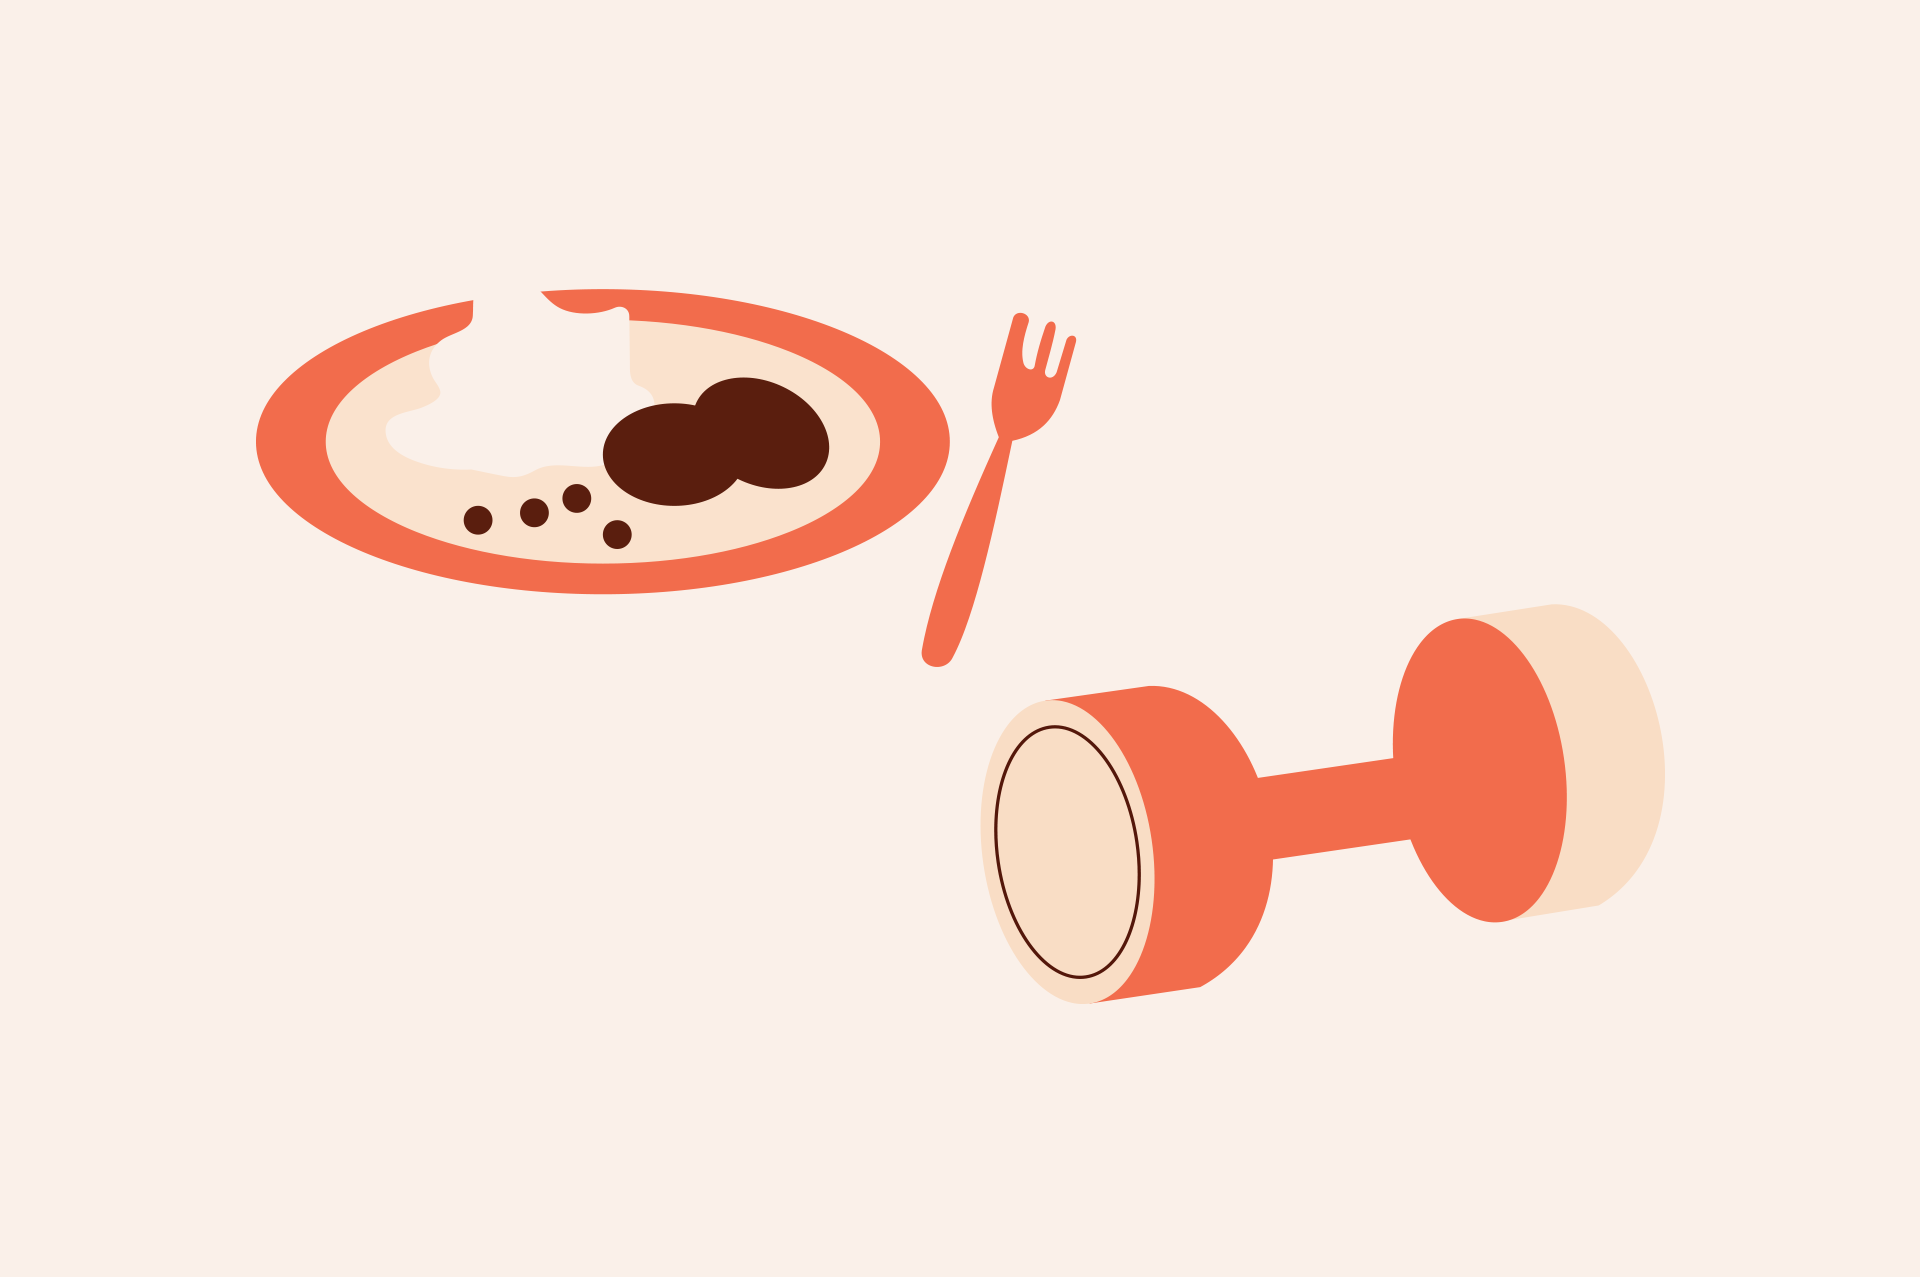 An illustration of a plate full of food and a dumbbell